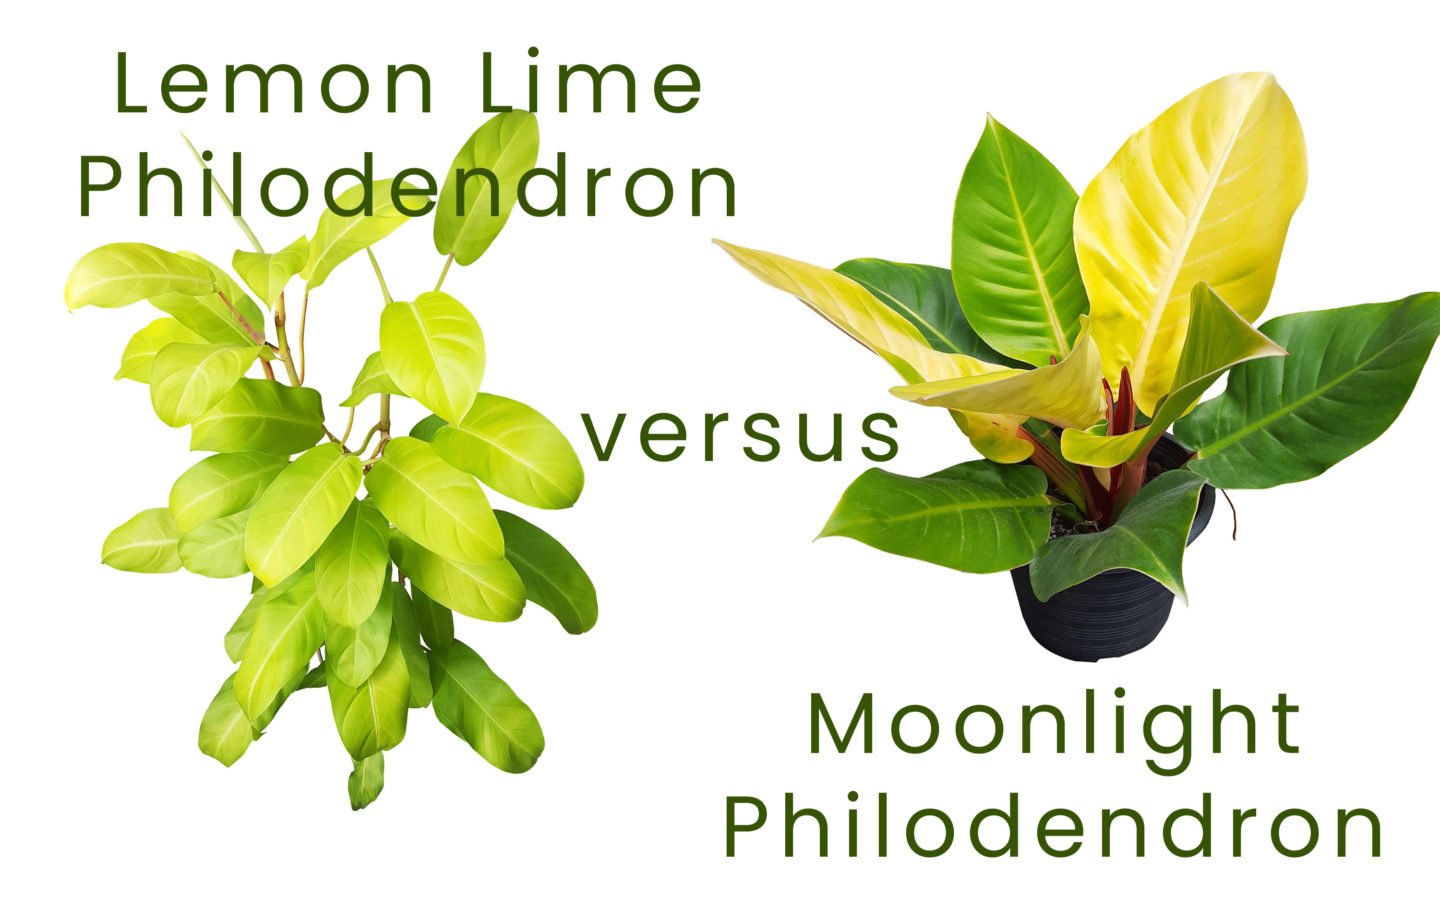 Lemon Lime Philodendron Versus Moonlight Philodendron